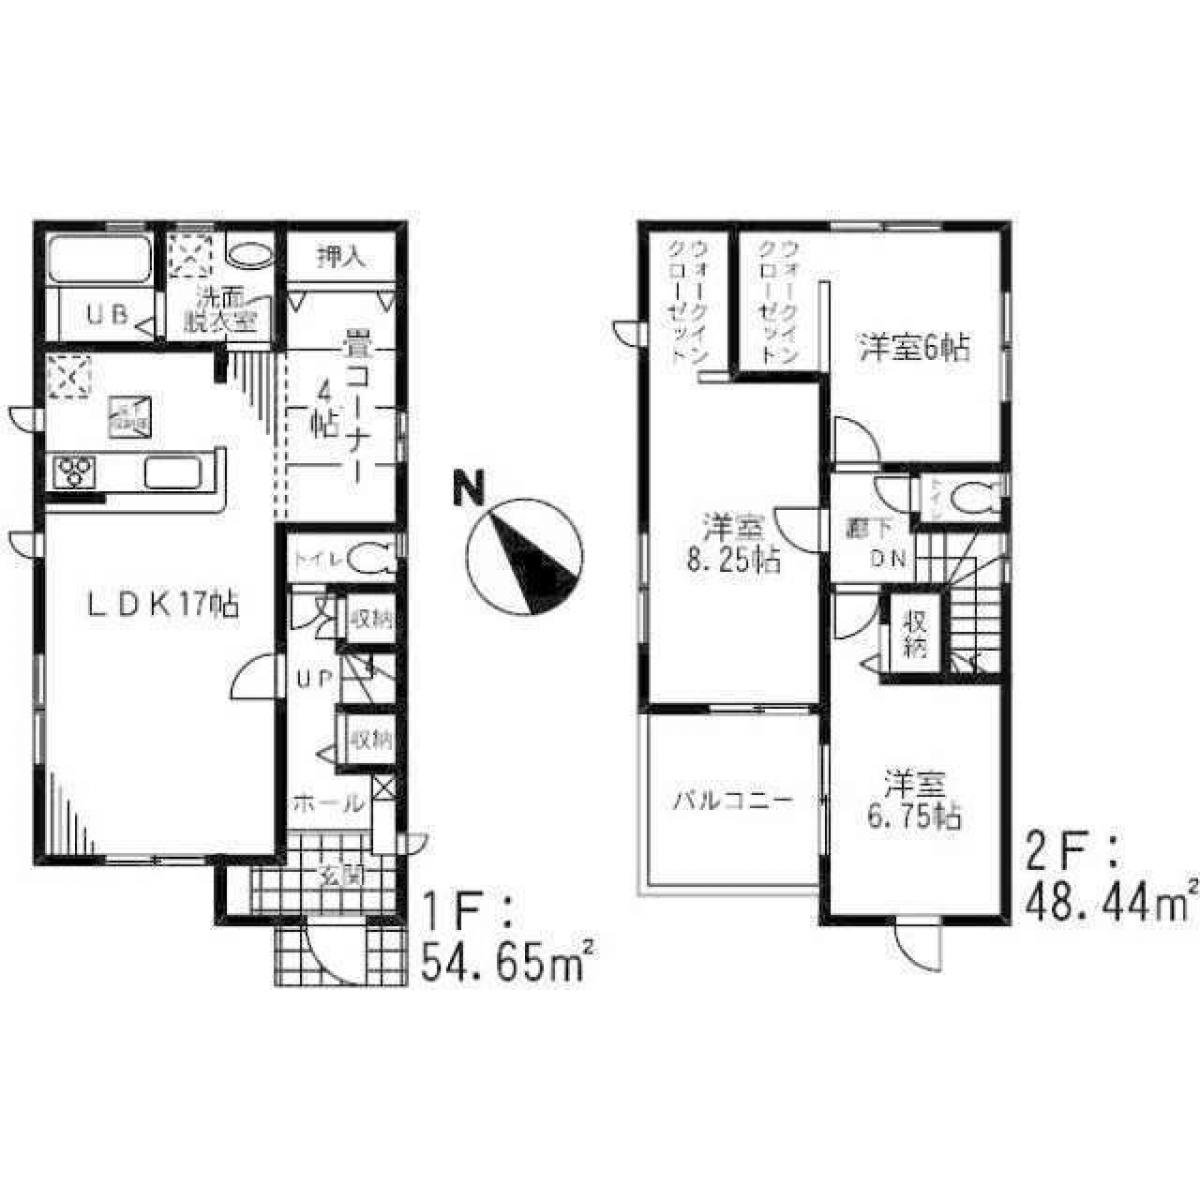 Picture of Home For Sale in Yotsukaido Shi, Chiba, Japan